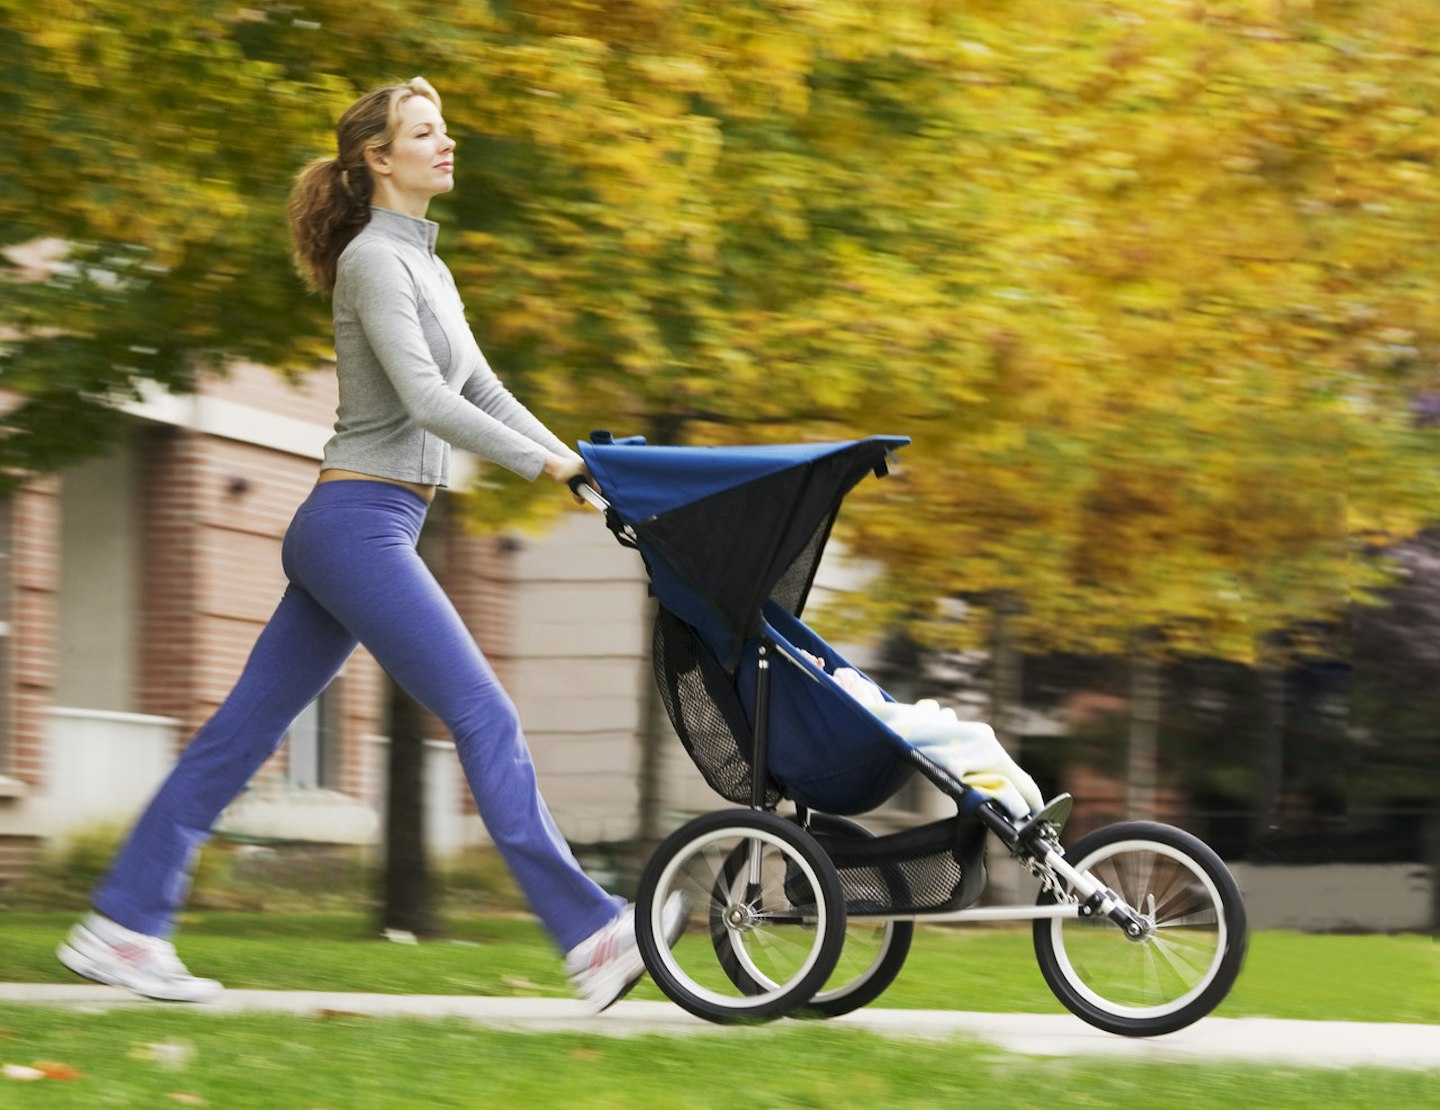 5 Fitness Trends That Totally Work For Mums